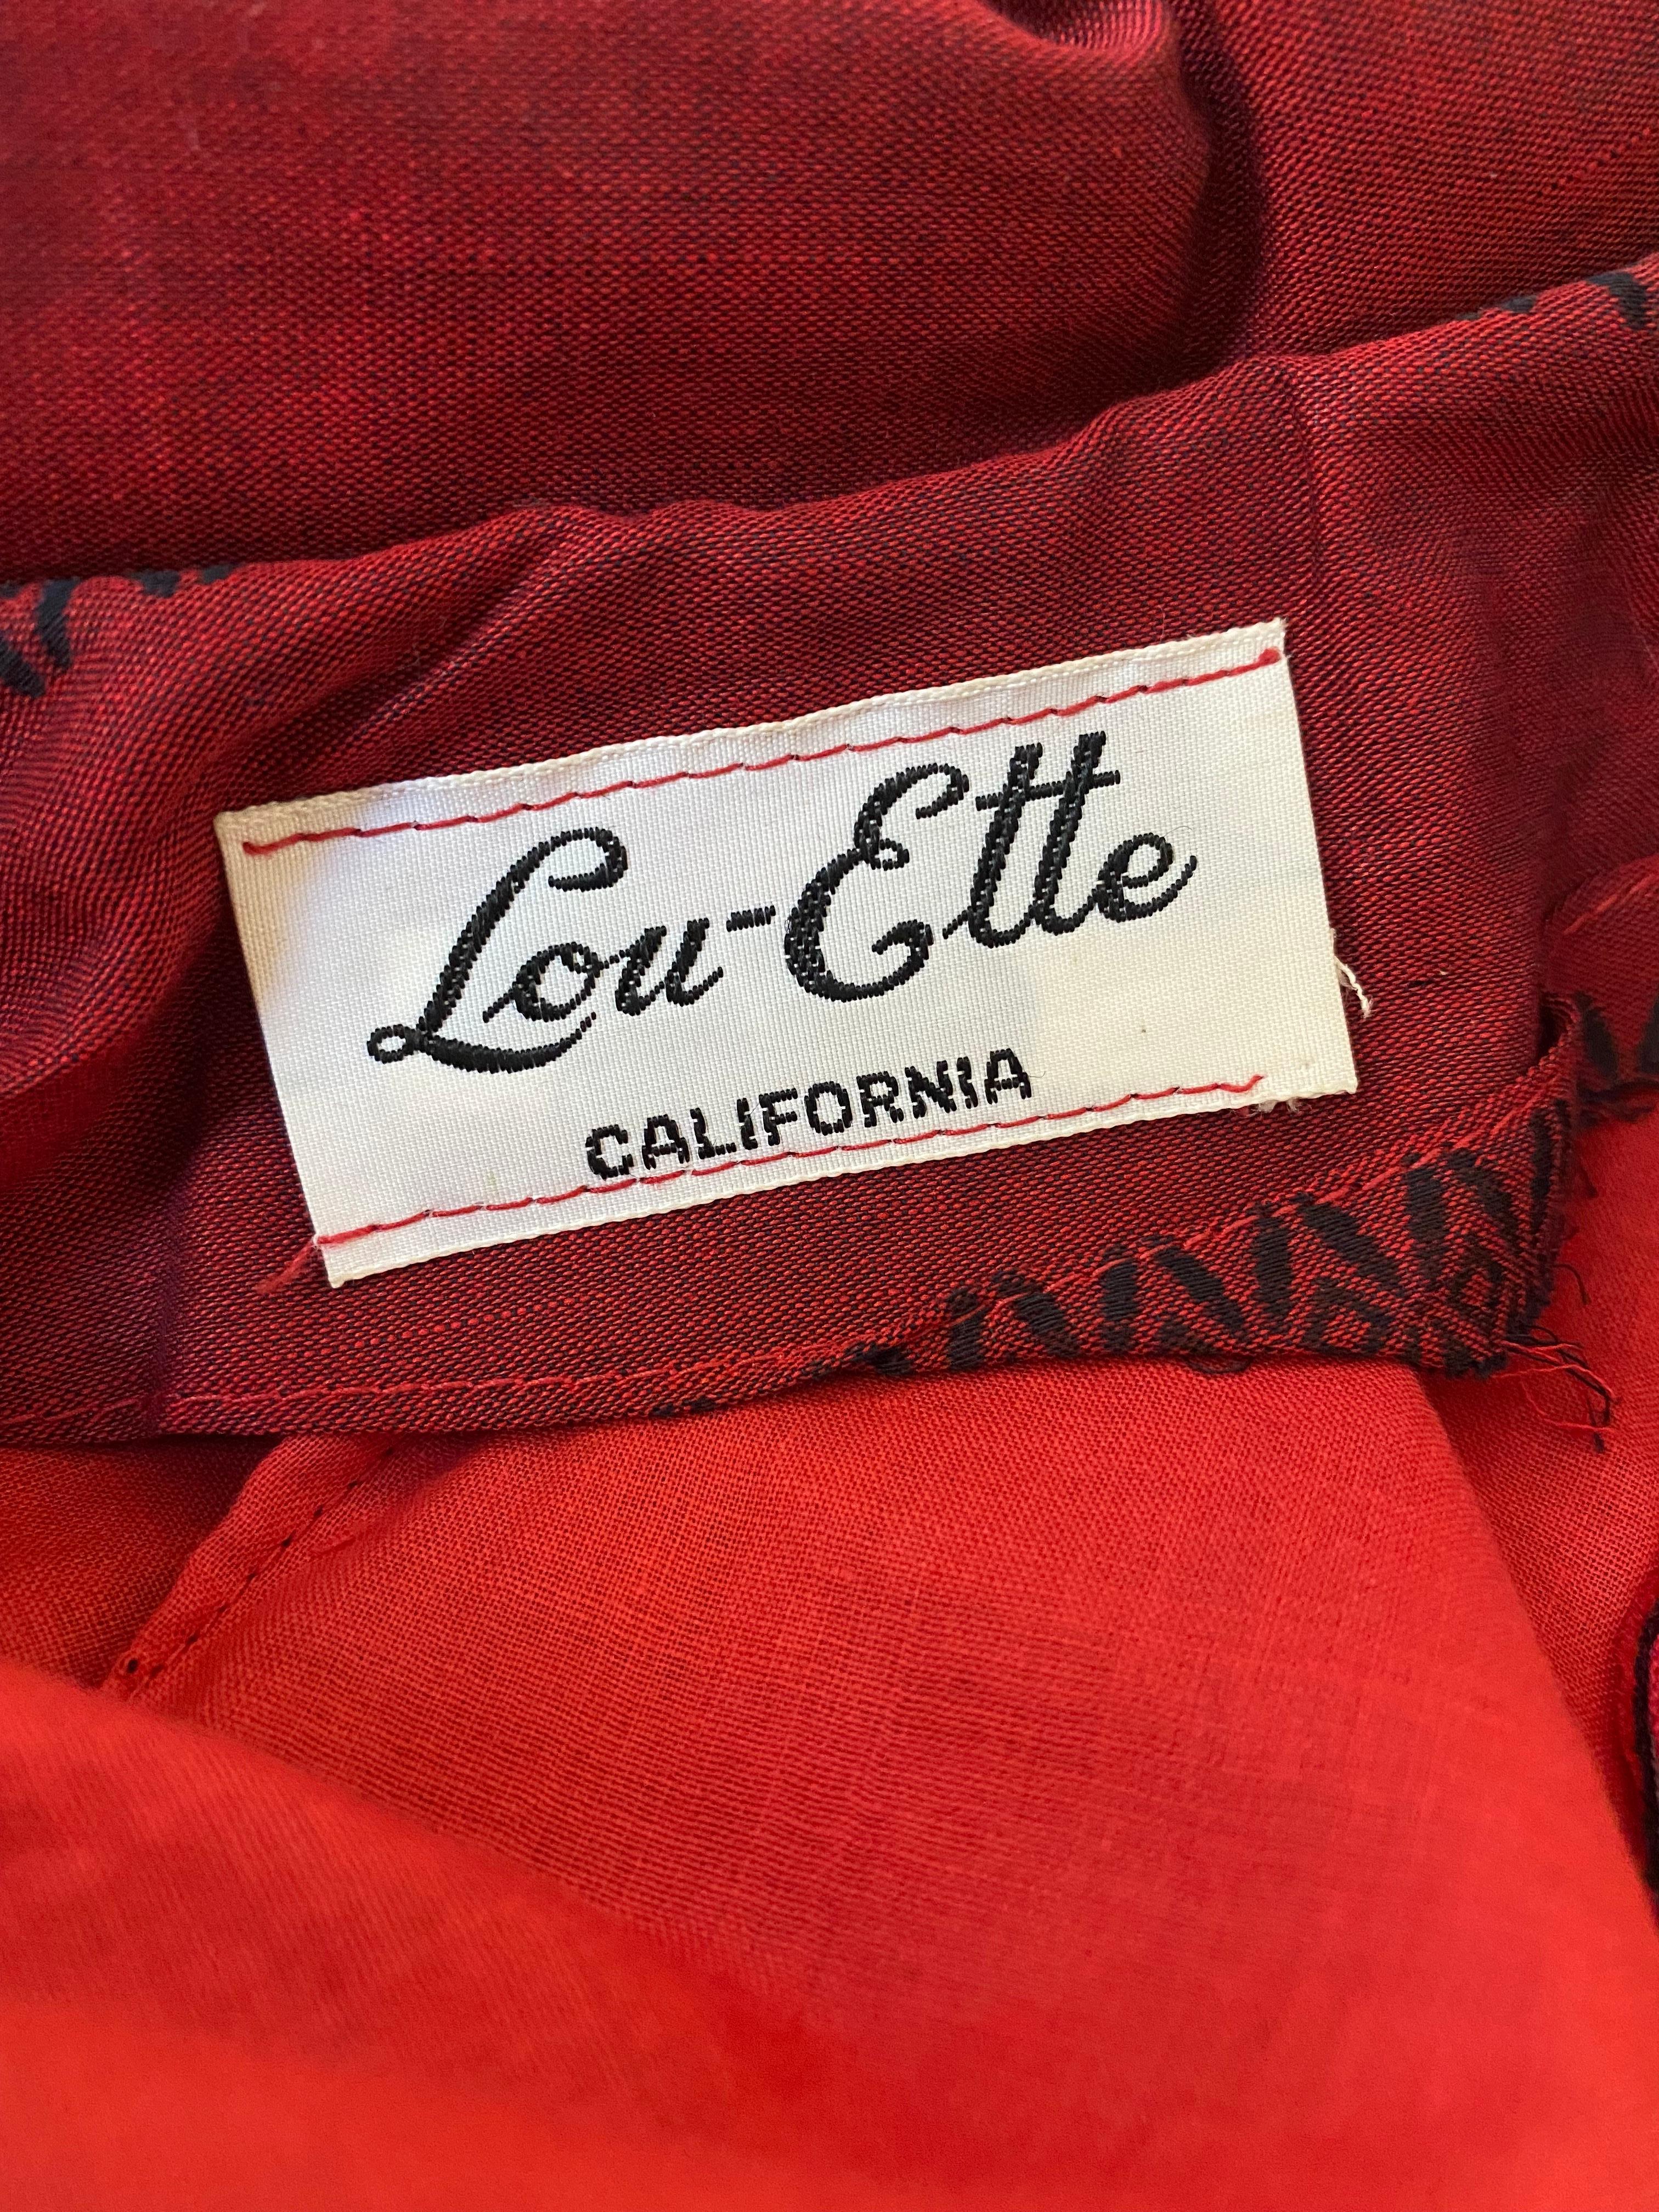 1950s Lou-Ette Red and Black Cotton Shirt Waister Dress For Sale 2